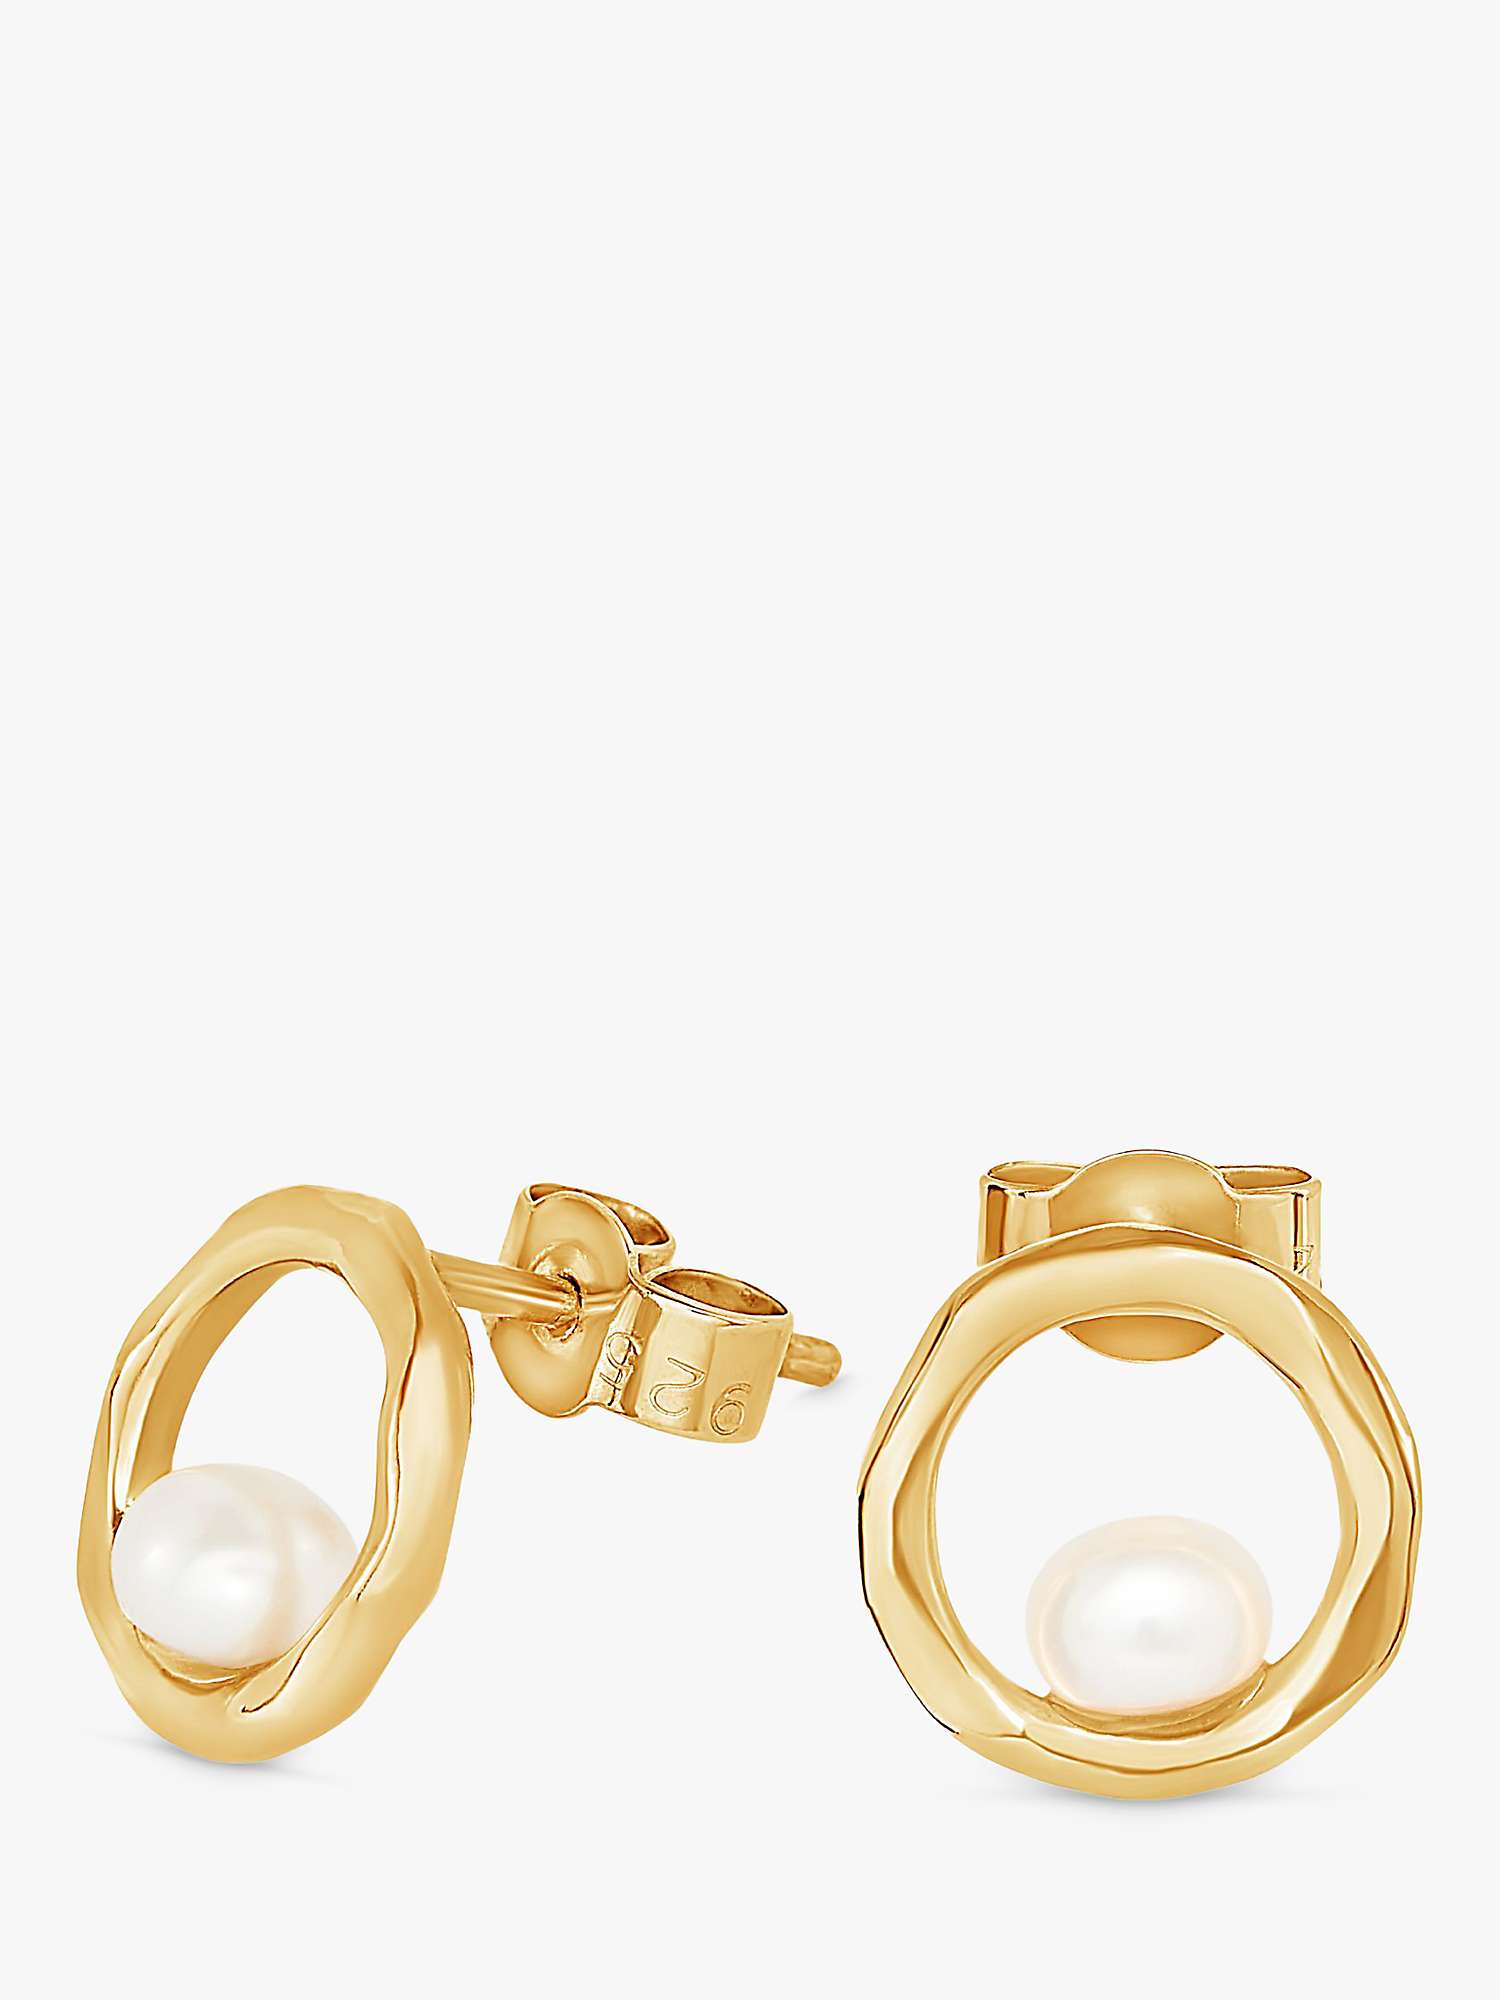 Buy Dower & Hall Freshwater Pearl Open Circle Stud Earrings, Gold/White Online at johnlewis.com